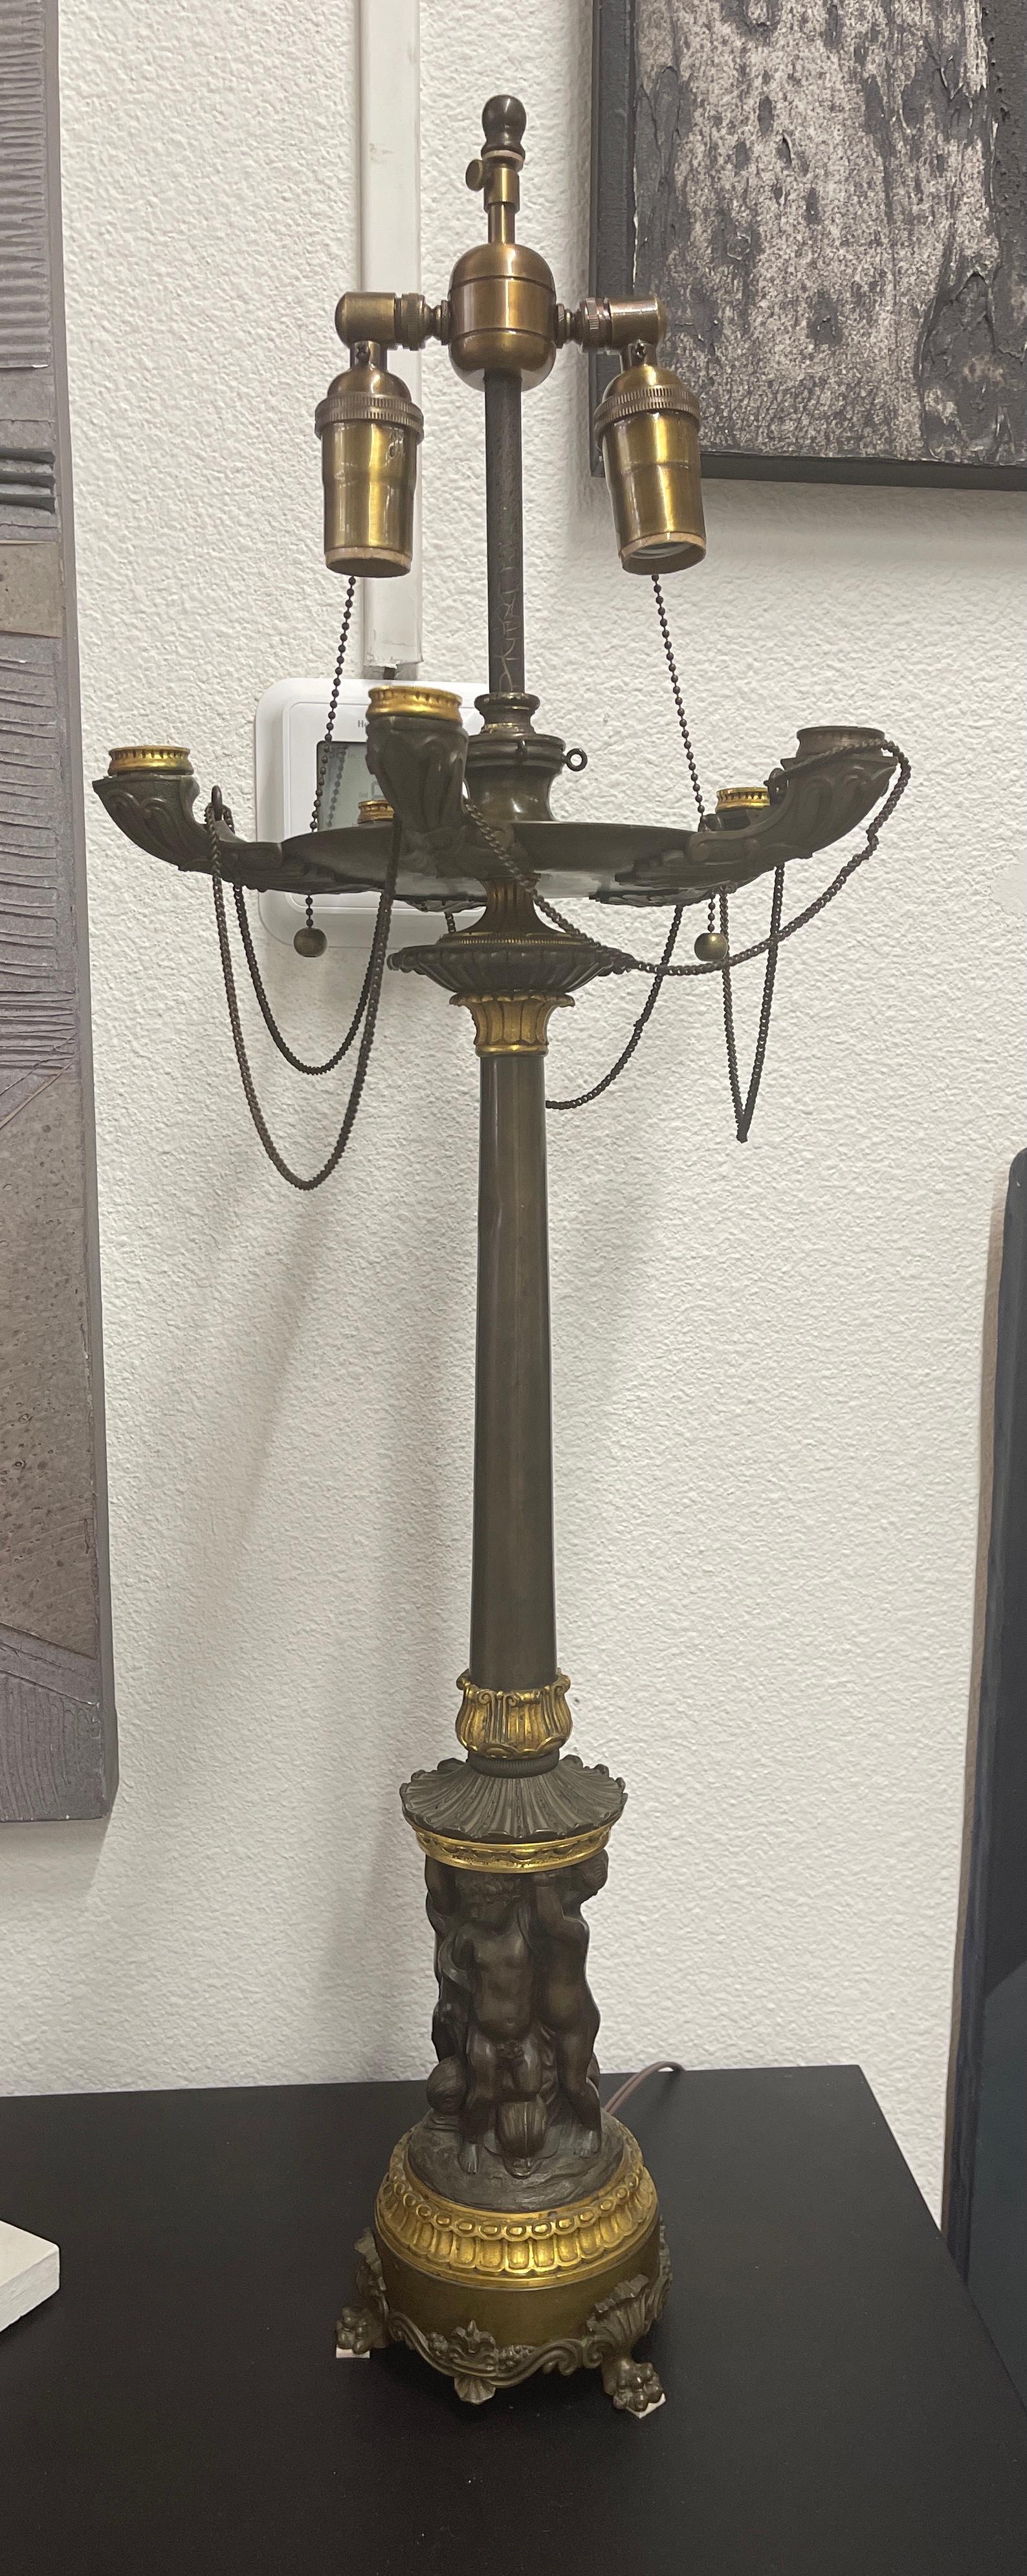 A lovely bronze neo classical lamp with cherubs adorning the base and faux oil lamp cups on top.  Exquisitely detailed casting details on this grand tour themed lamp. It has just been rewired and works well.  In good age appropriate condition with